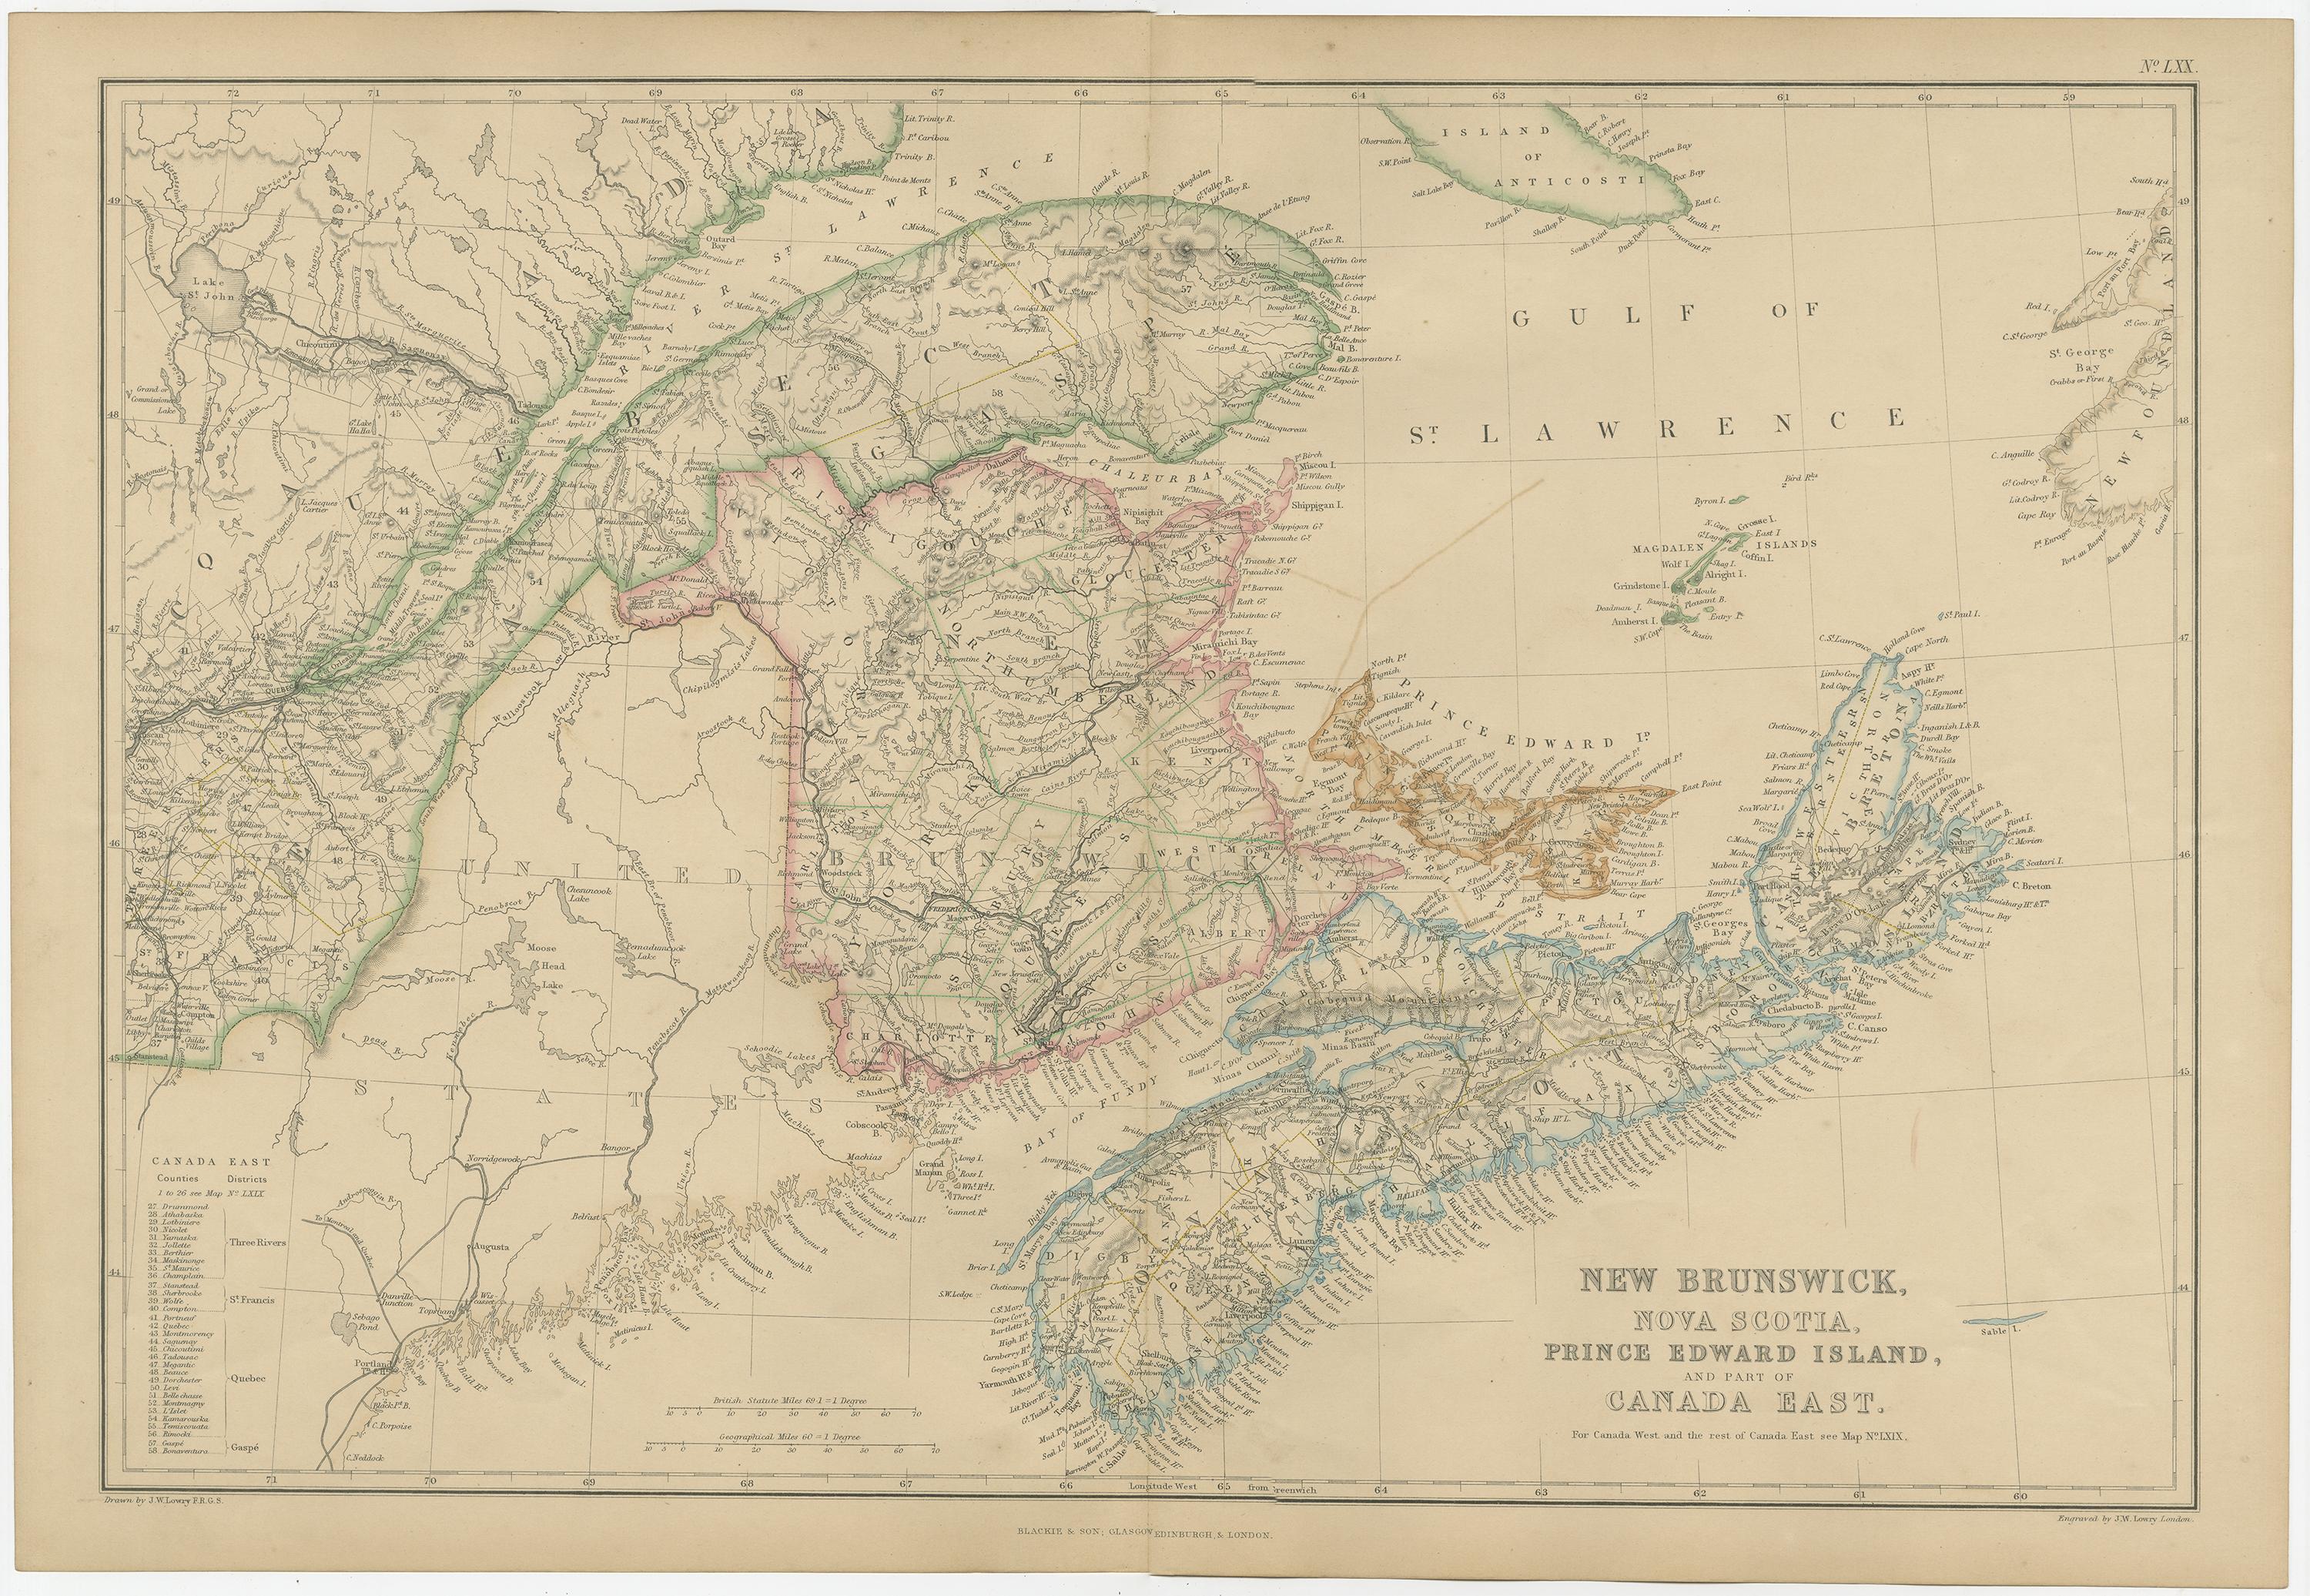 Antique map titled 'New Brunswick, Nova Scotia, Prince Edward Island and Part of Canada east'. Original antique map of New Brunswick, Nova Scotia, Prince Edward Island and Part of Canada east. This map originates from ‘The Imperial Atlas of Modern